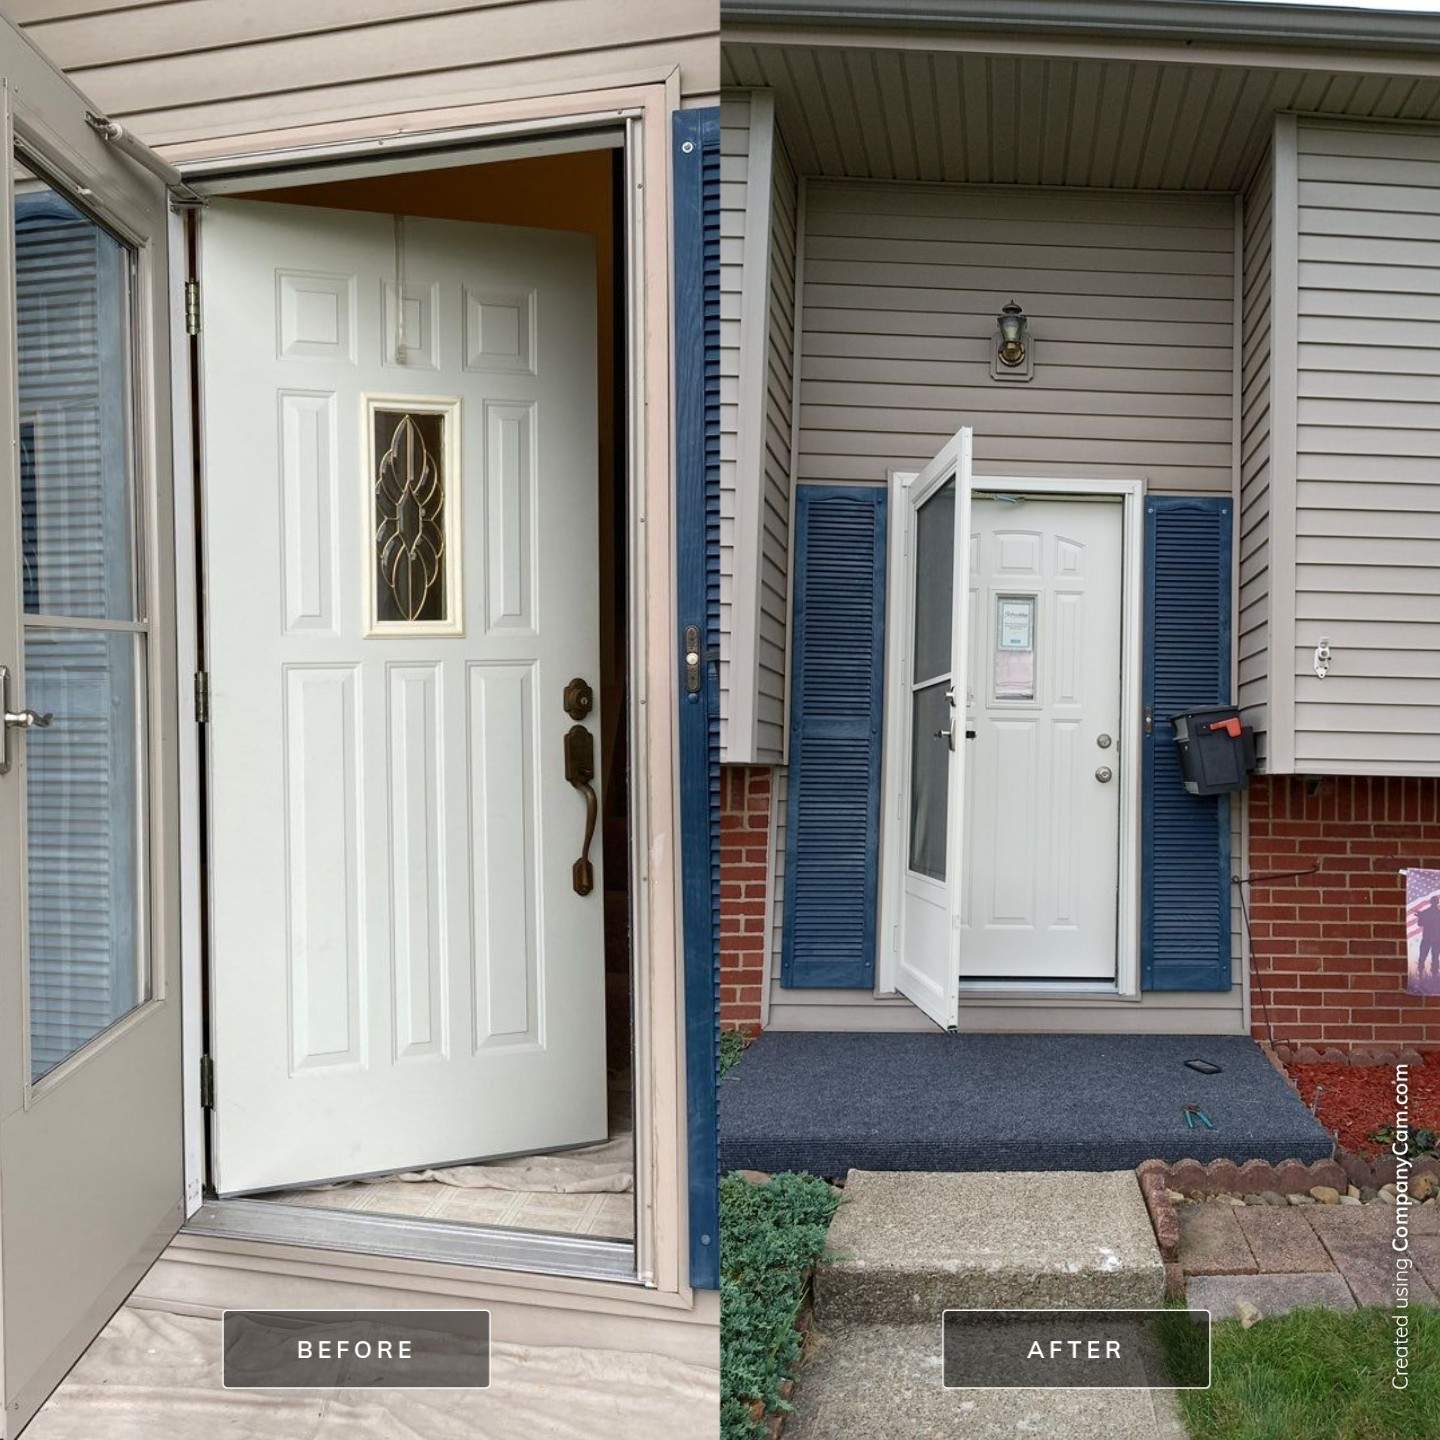 Before and After Entry/Storm Door (Outside)